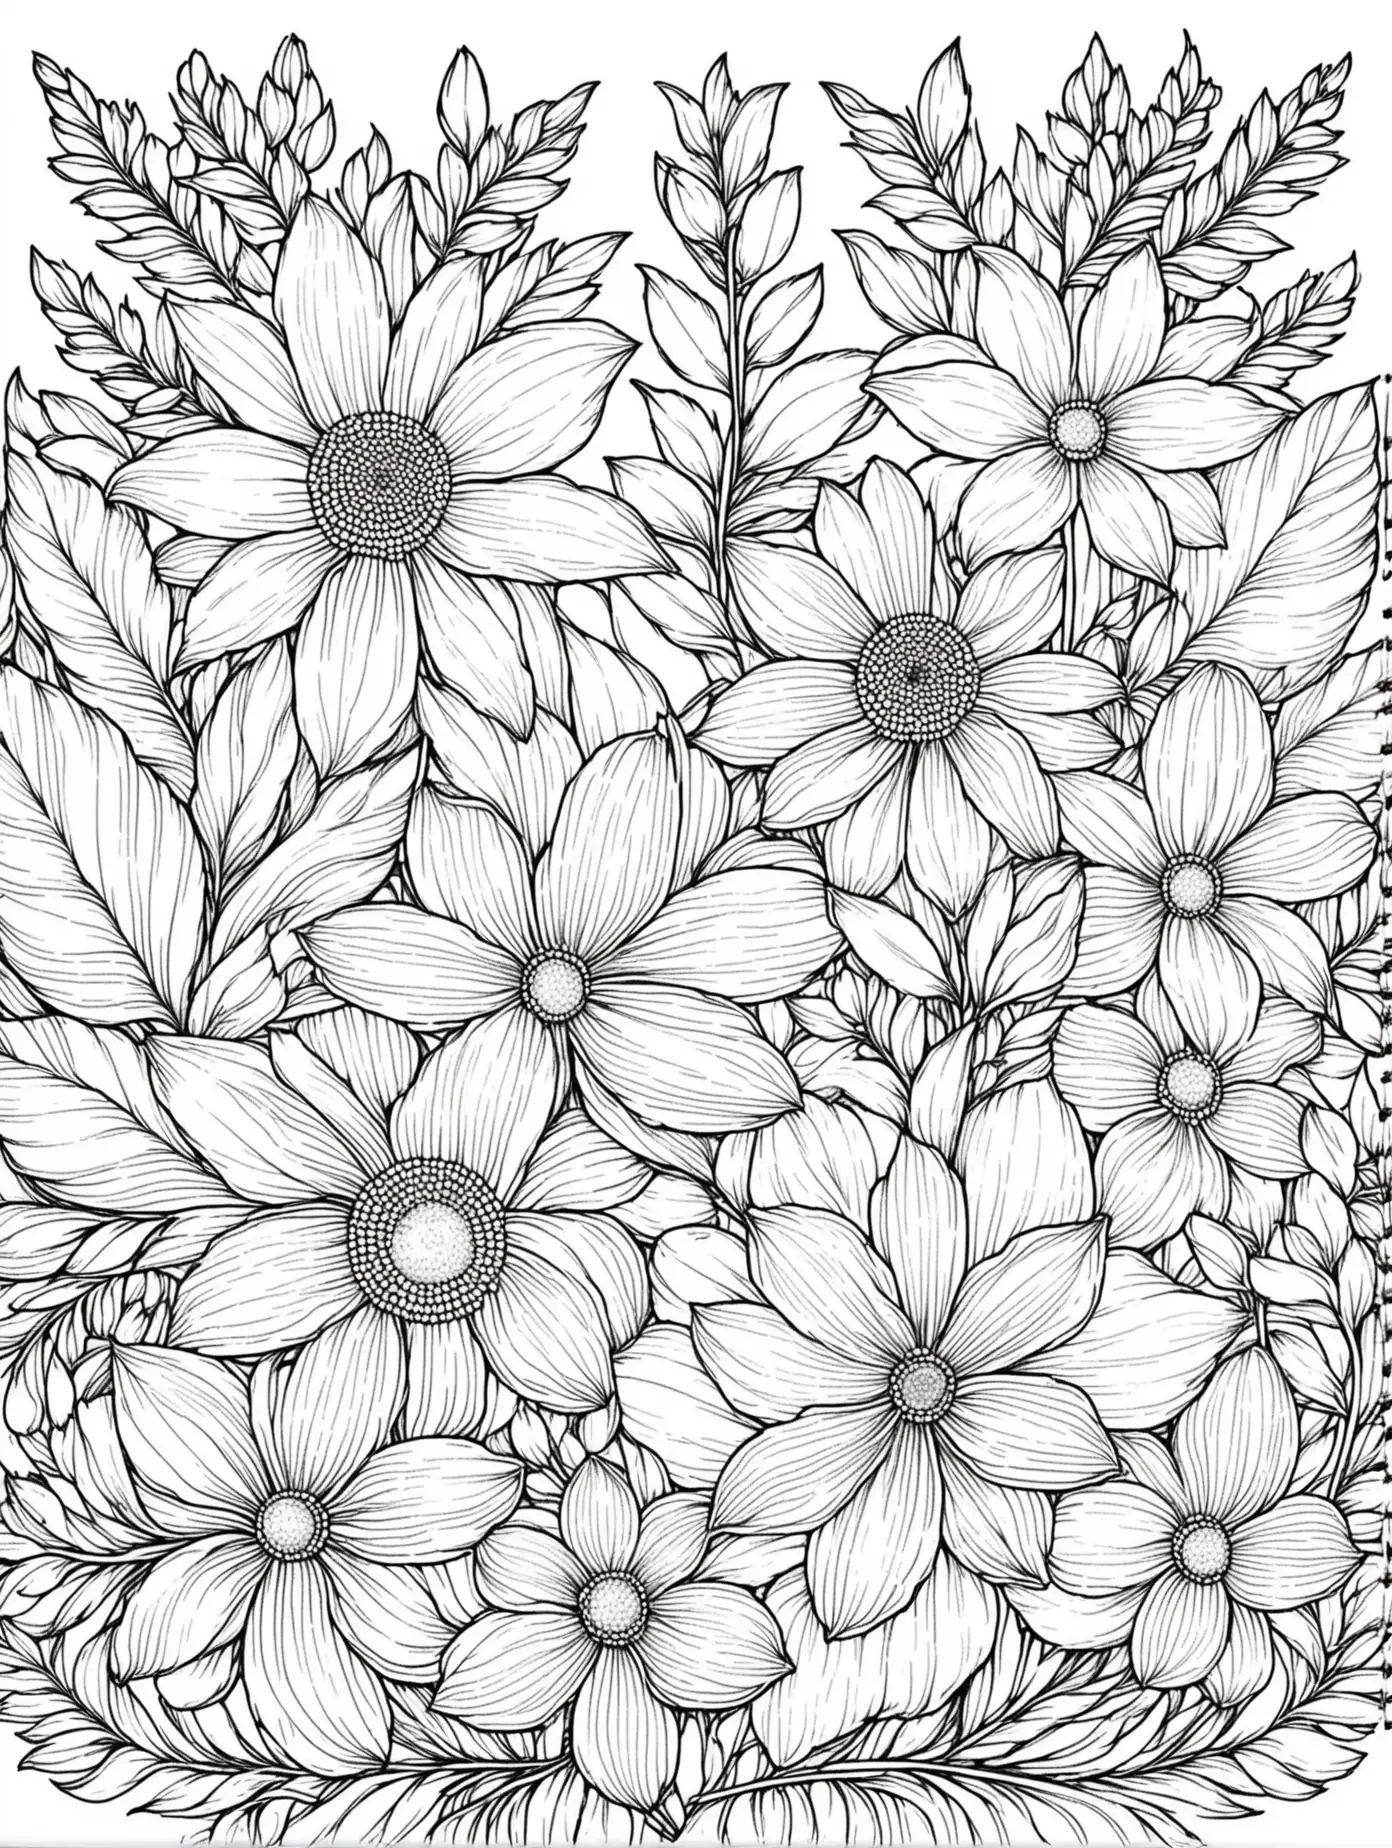 Beautiful black and flowers composition for coloring page, thin lines, minimum details, no greys